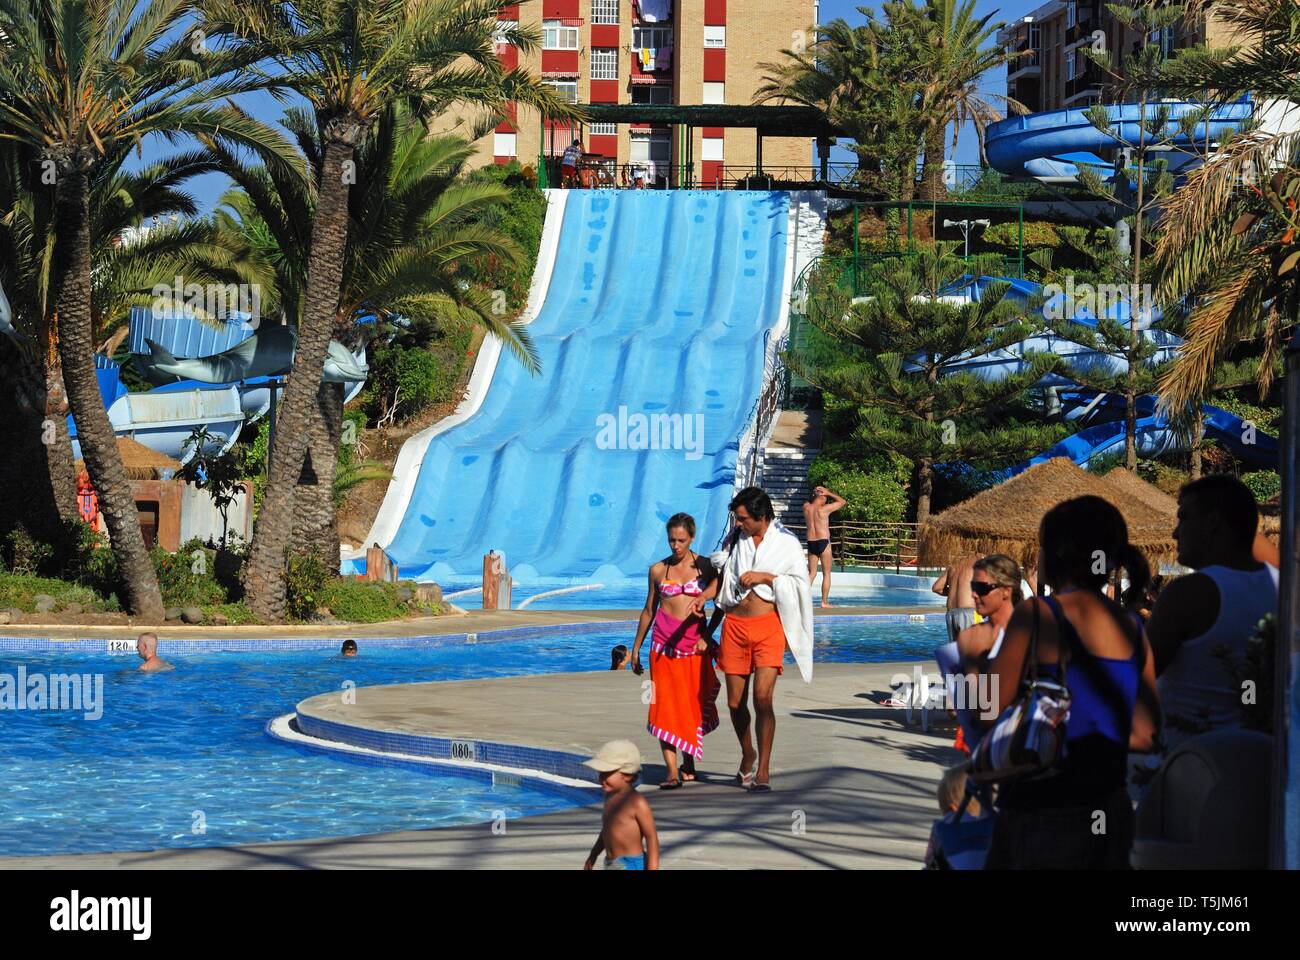 Water slide and pool in the water park with tourists enjoying the setting,  Fuengirola, Malaga Province, Andalusia, Spain, Western Europe Stock Photo -  Alamy